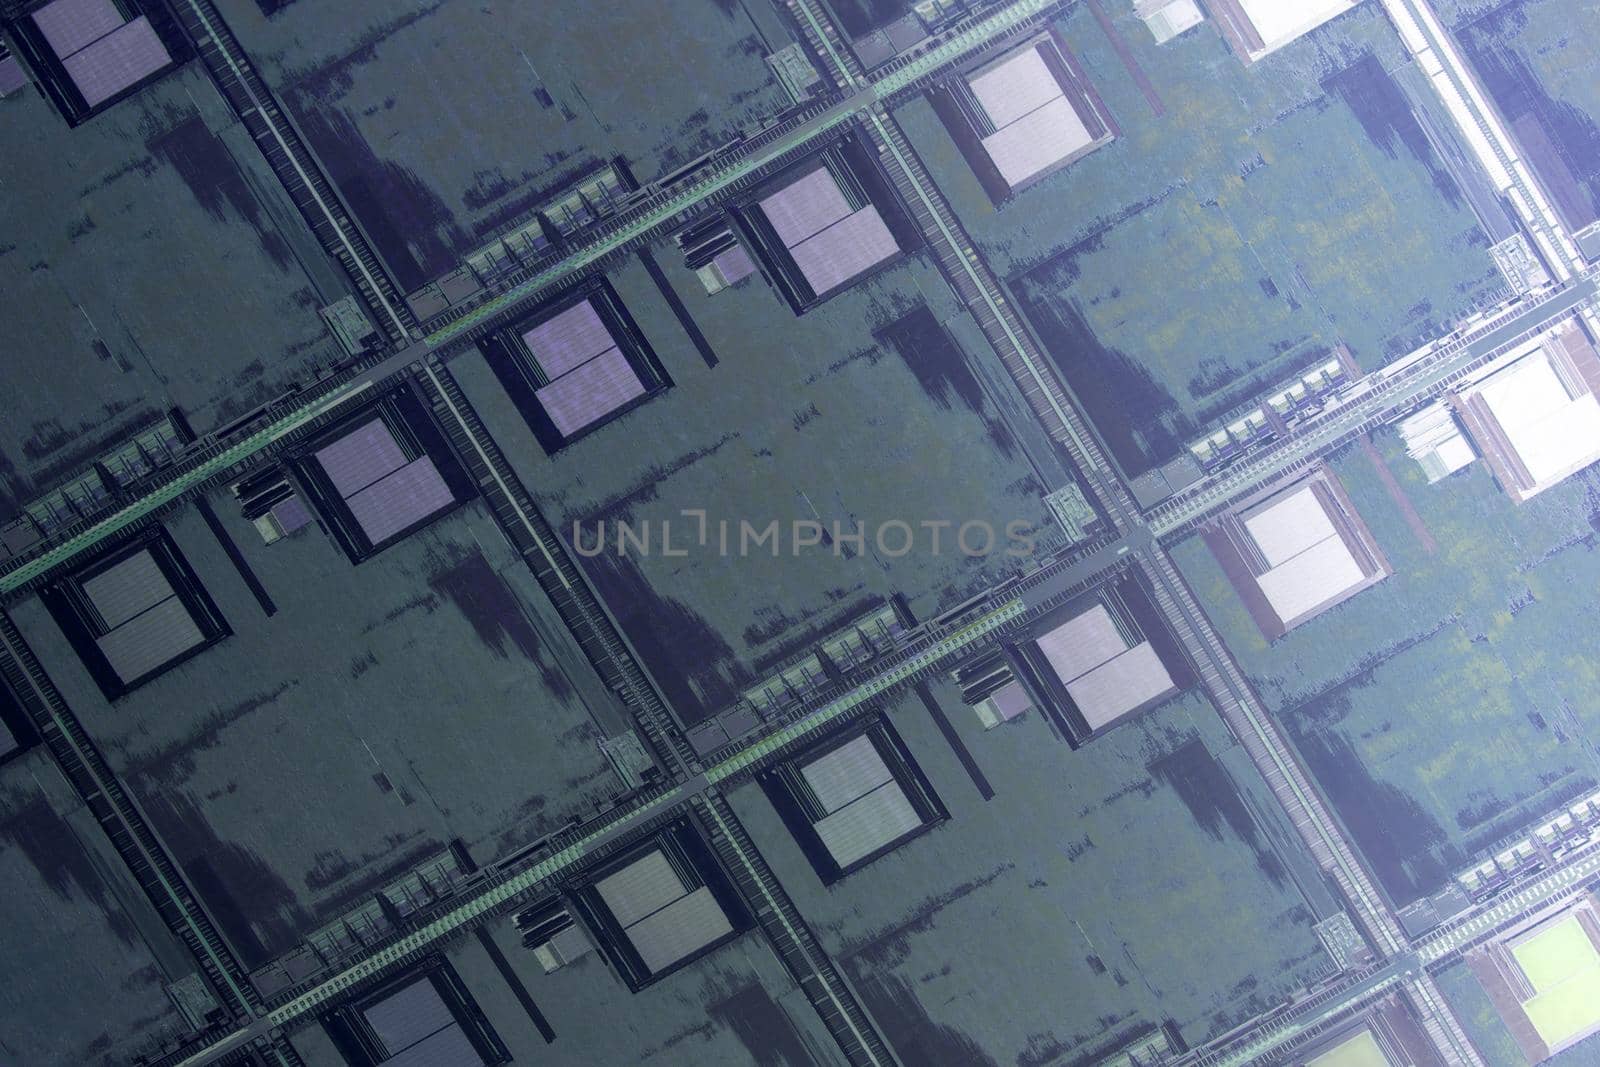 Silicon monocrystalline wafer with microchips after photolithography etching manufacturing used in fabrication of electronic integrated circuits. Full-frame high-tech macro background.